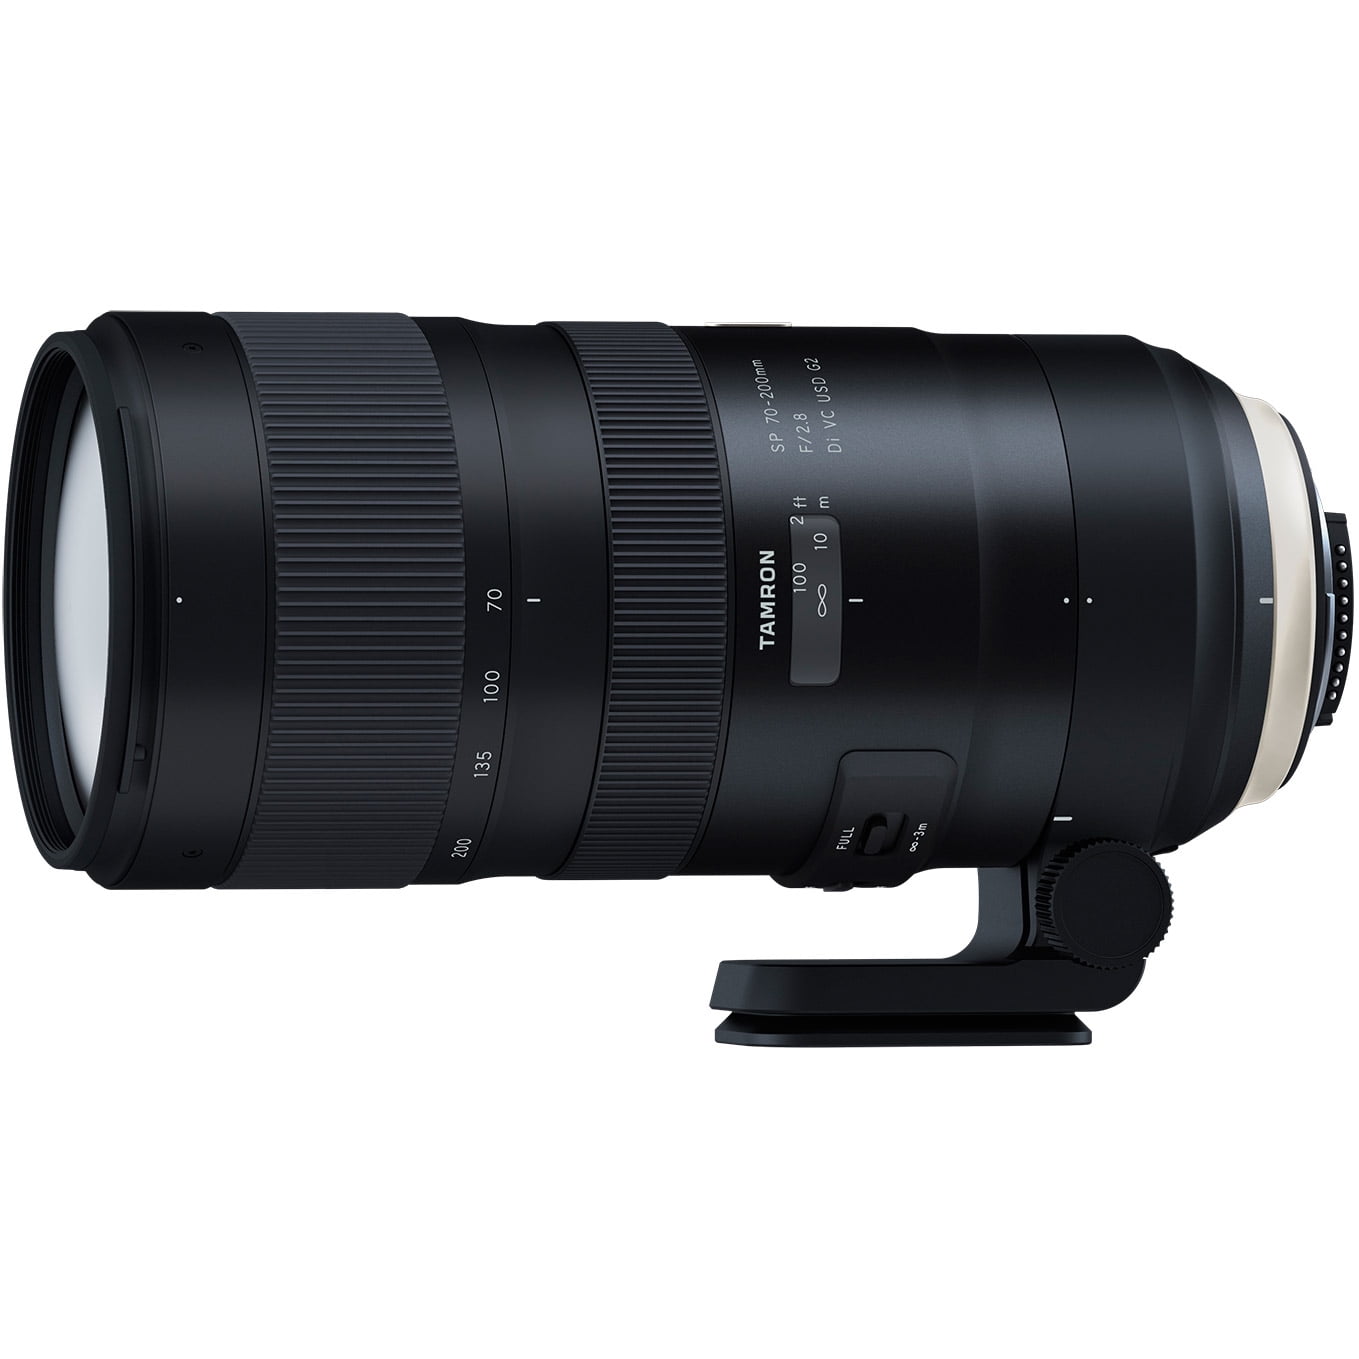 Tamron SP 70-200mm F/2.8 Di VC USD G2 Lens (A025) for Canon 